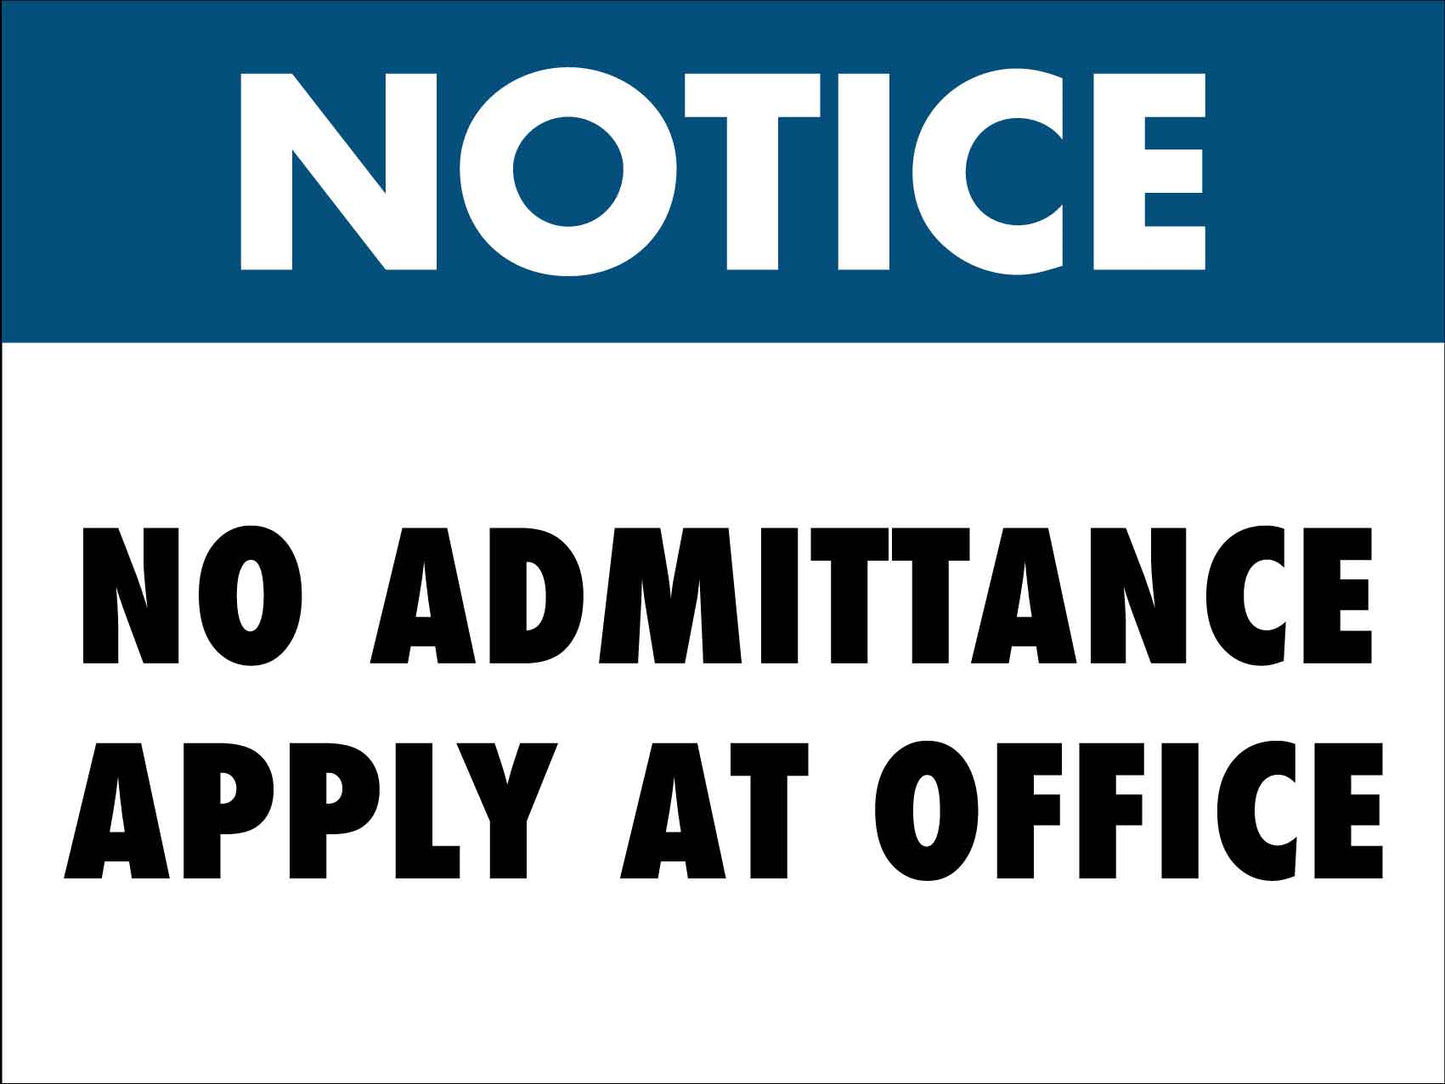 Notice No Admittance Apply At Office Sign